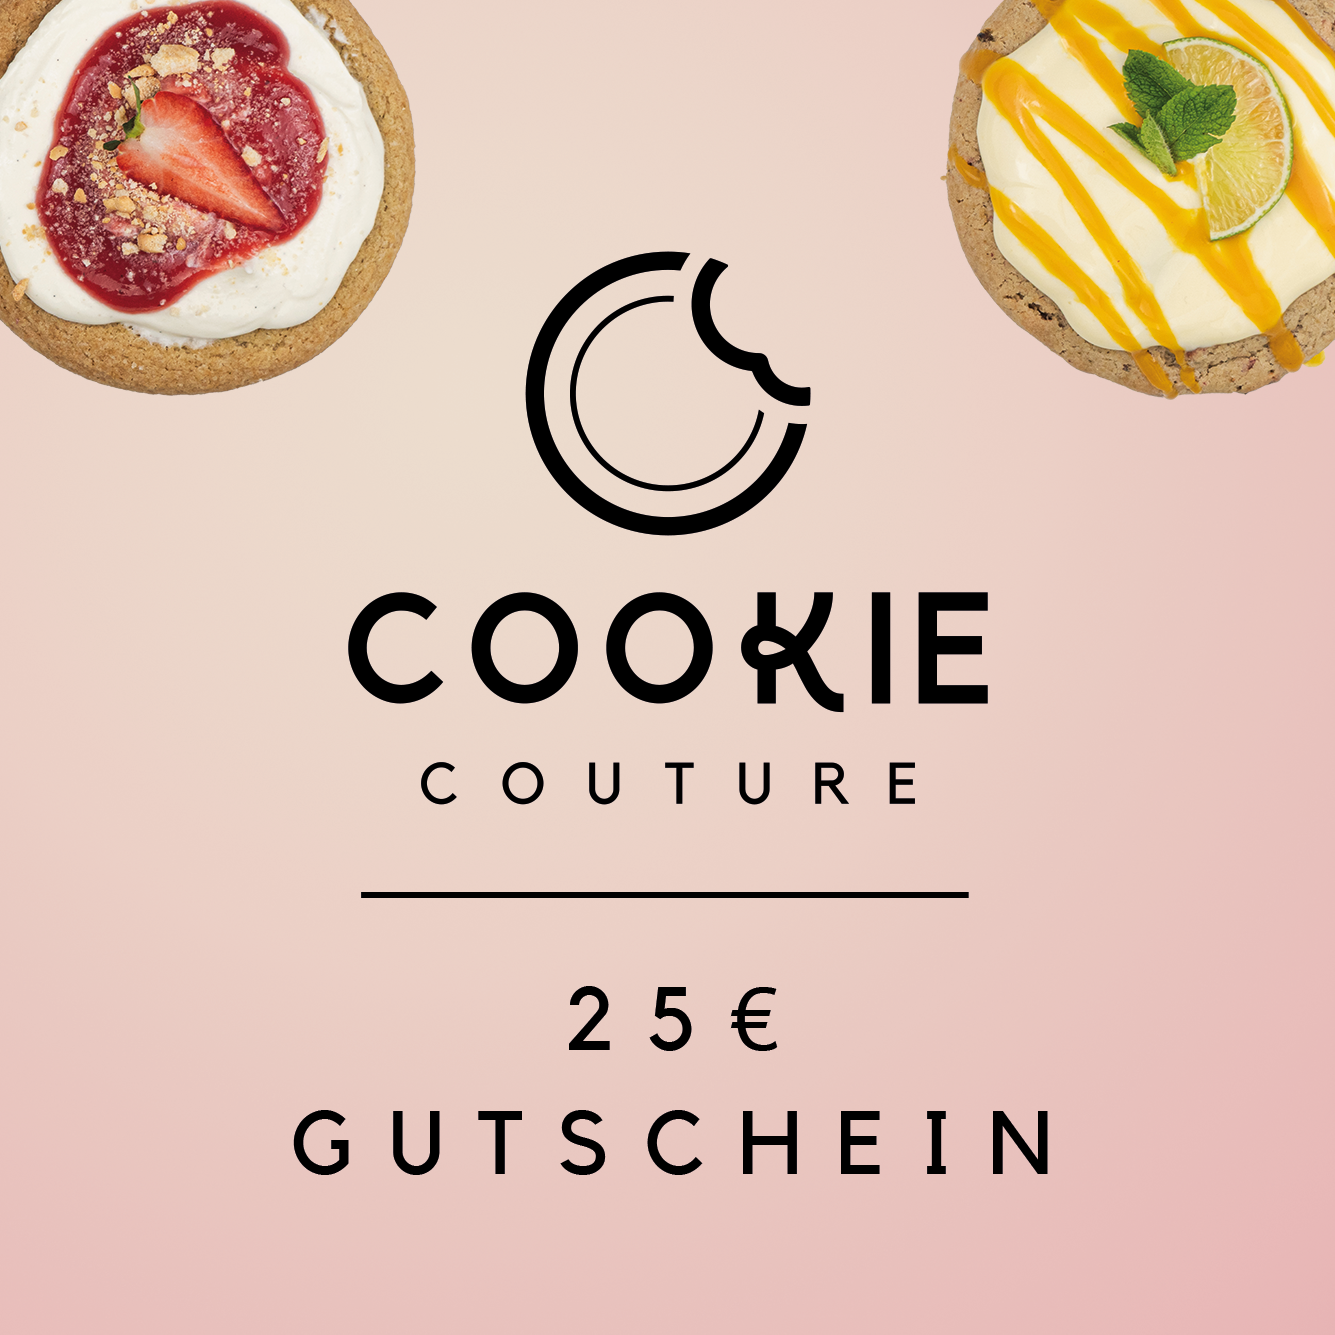 Cookie Couture 25€ Voucher